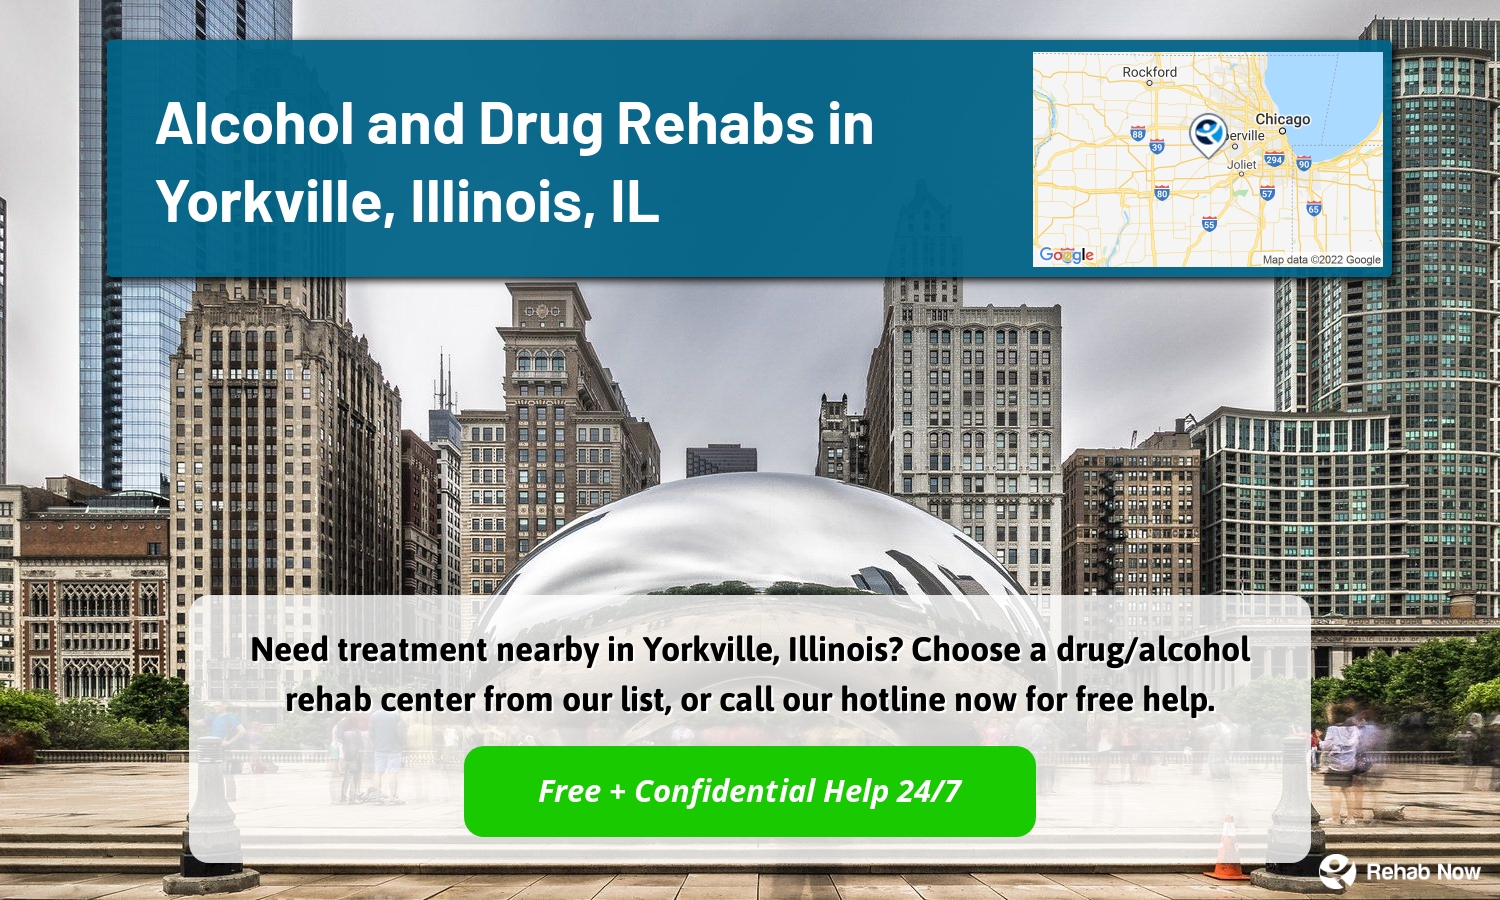 Need treatment nearby in Yorkville, Illinois? Choose a drug/alcohol rehab center from our list, or call our hotline now for free help.